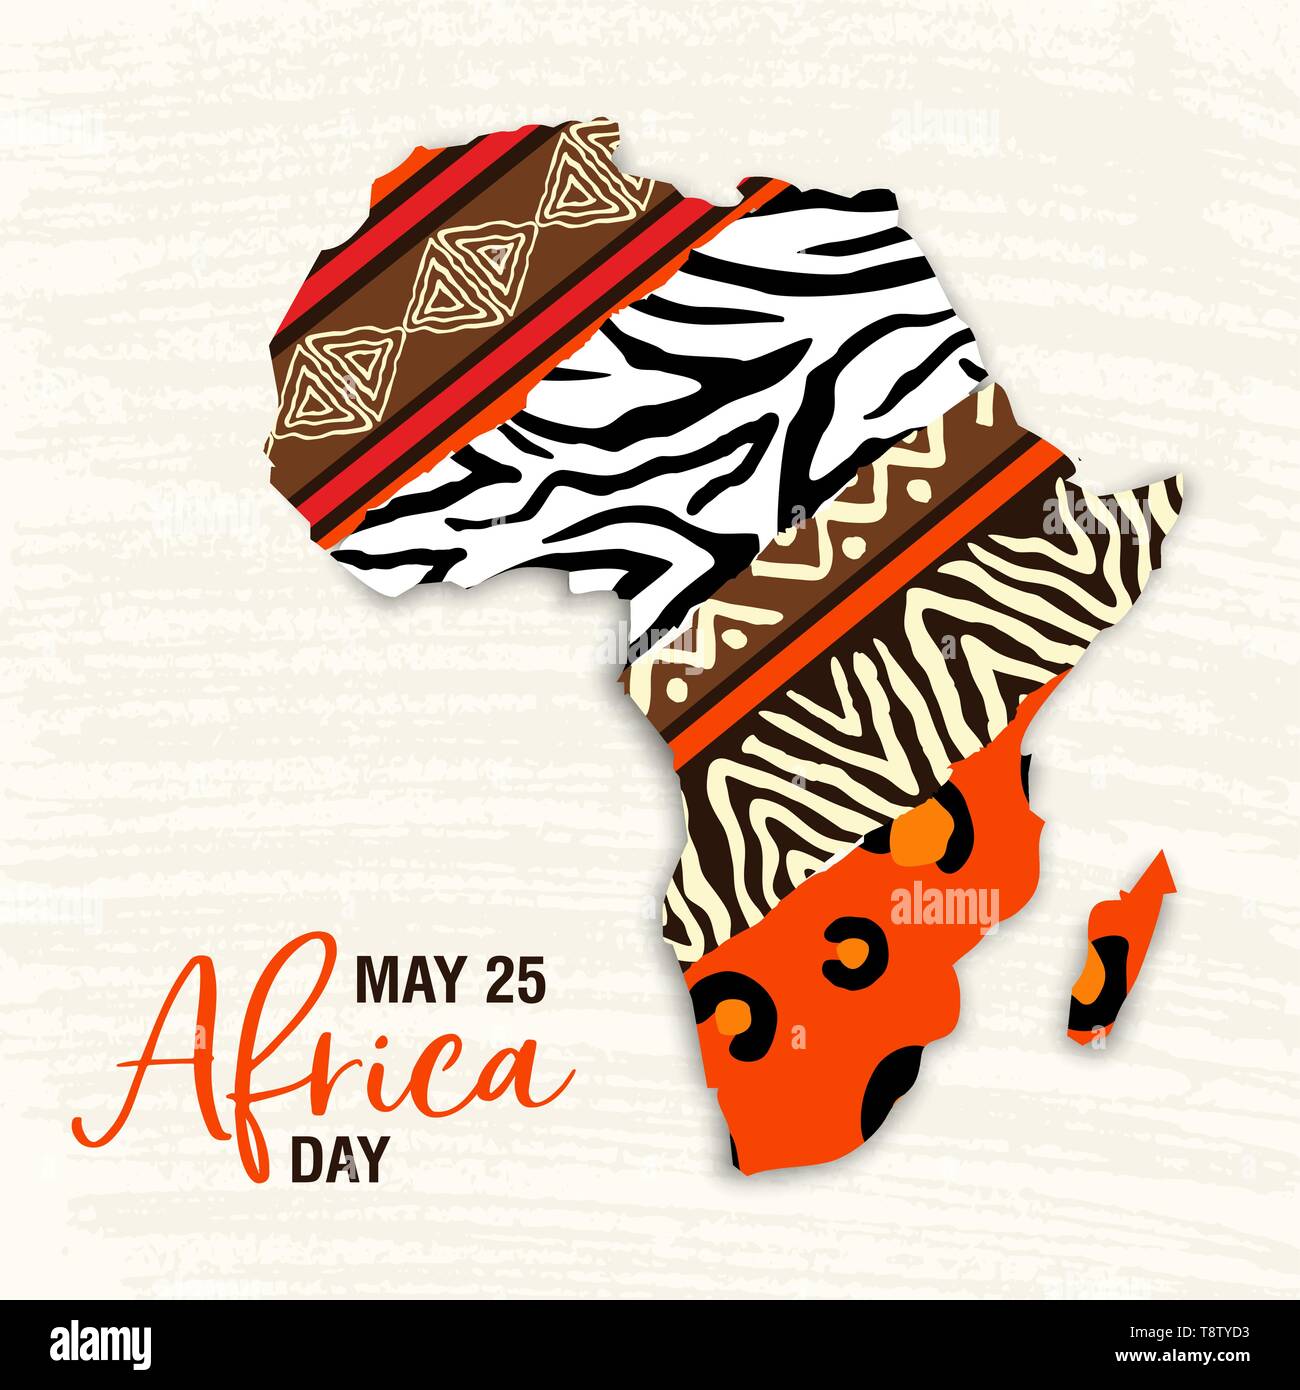 Africa Day greeting card illustration for 25 may celebration. African continent map with ethnic art and wild animal print textures. Stock Vector